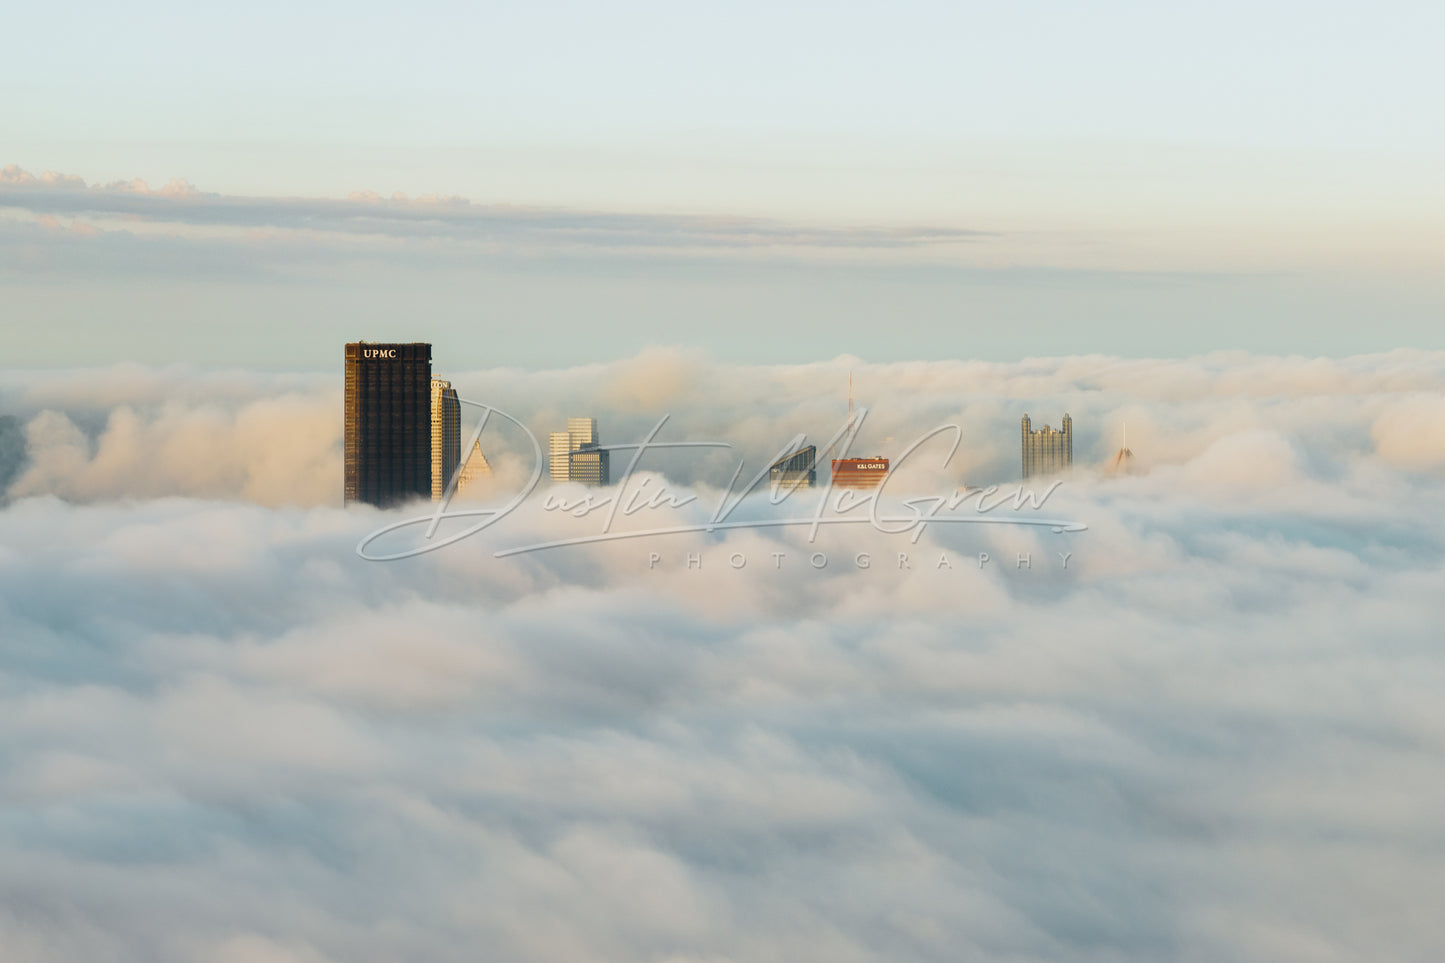 A City in the Clouds - Pittsburgh Floating on the Fog